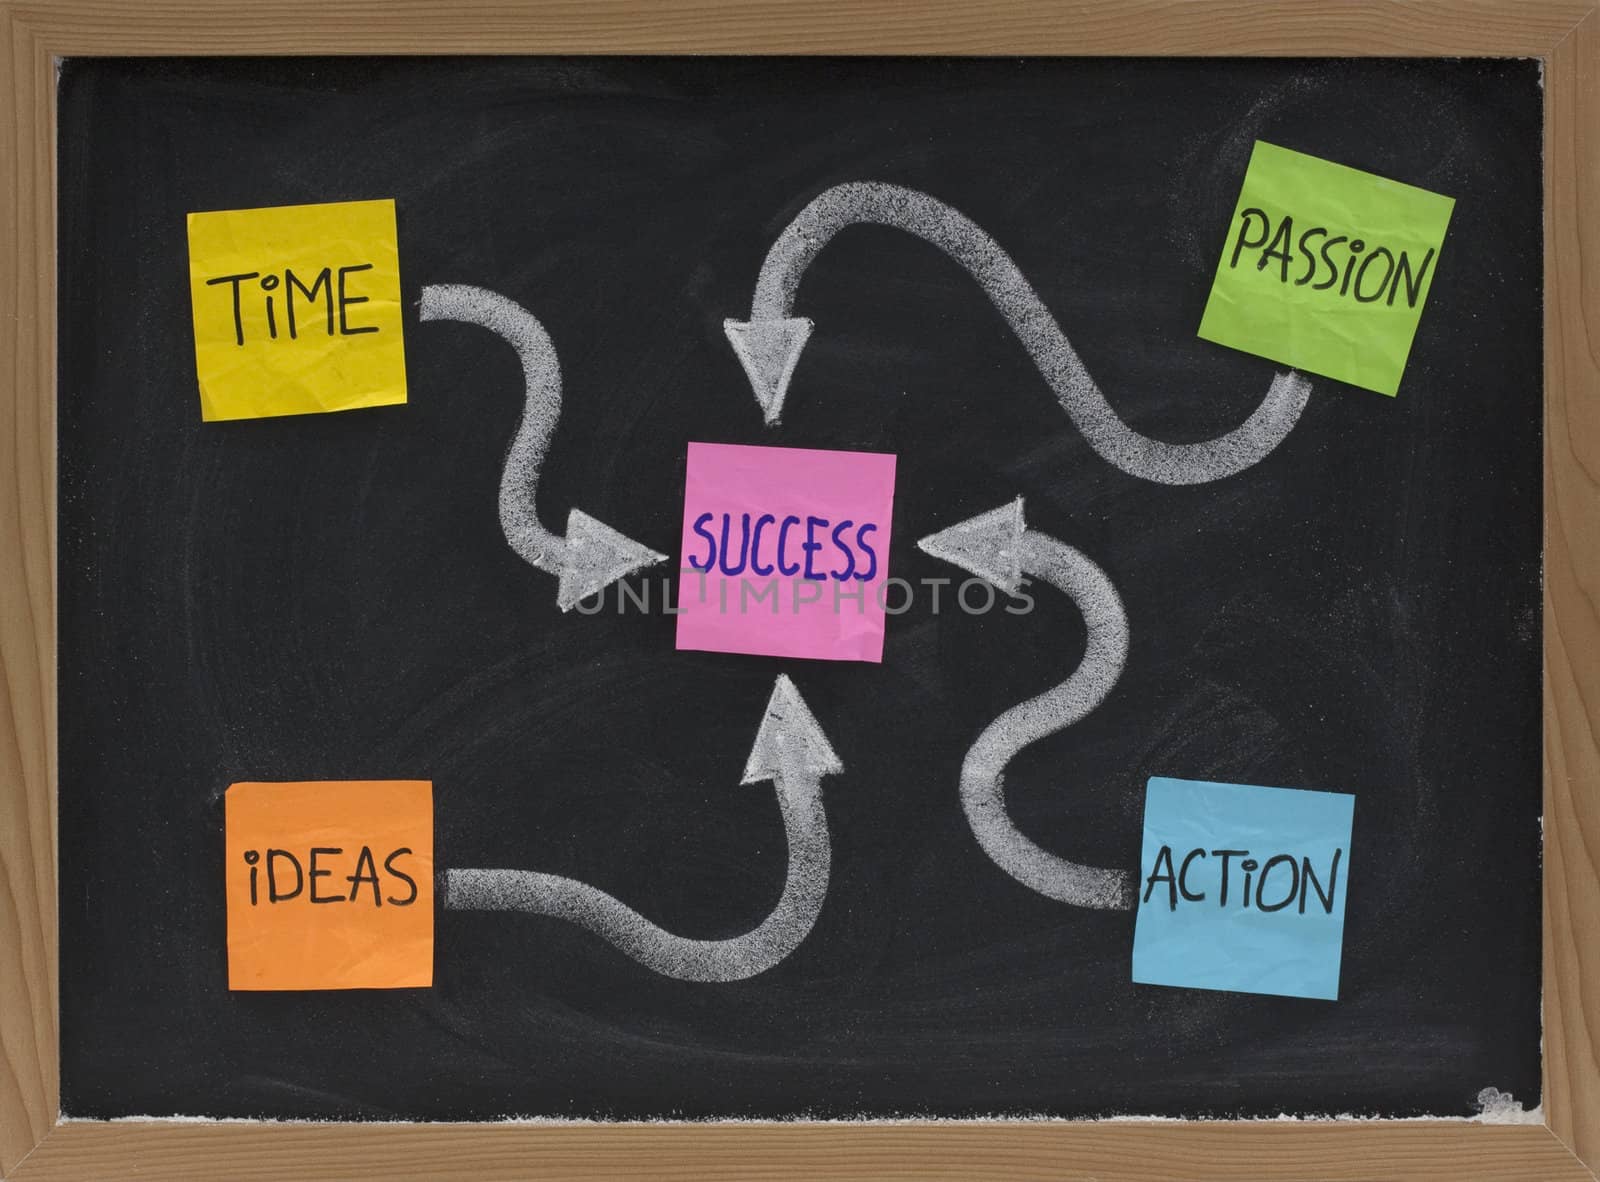 time, ideas, action, passion - success ingredients concept presented with colorful noted and white chalk on blackboard